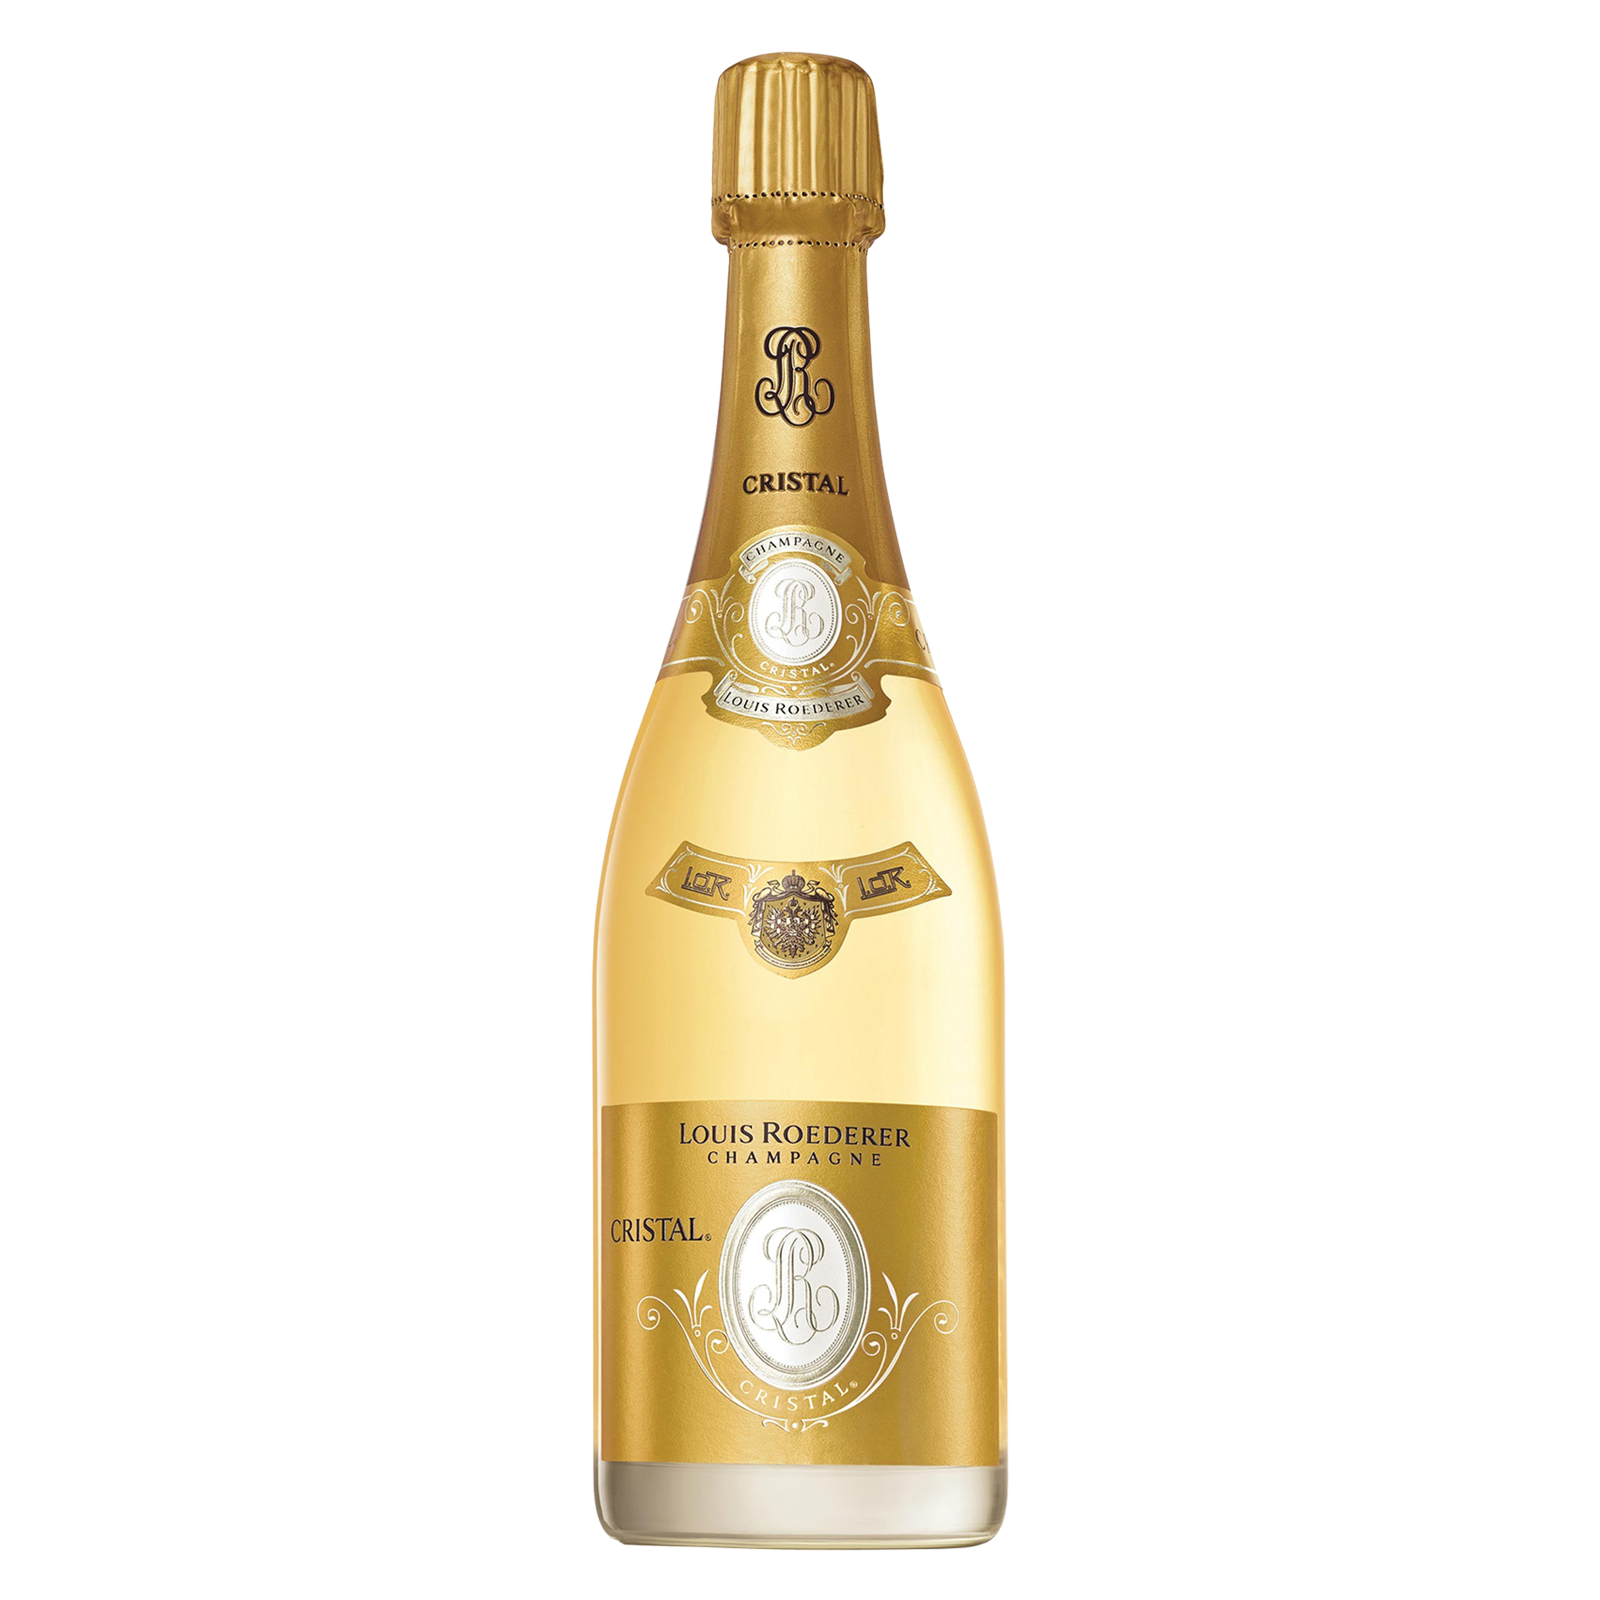 Louis Roederer Cristal Champagne 750 ml